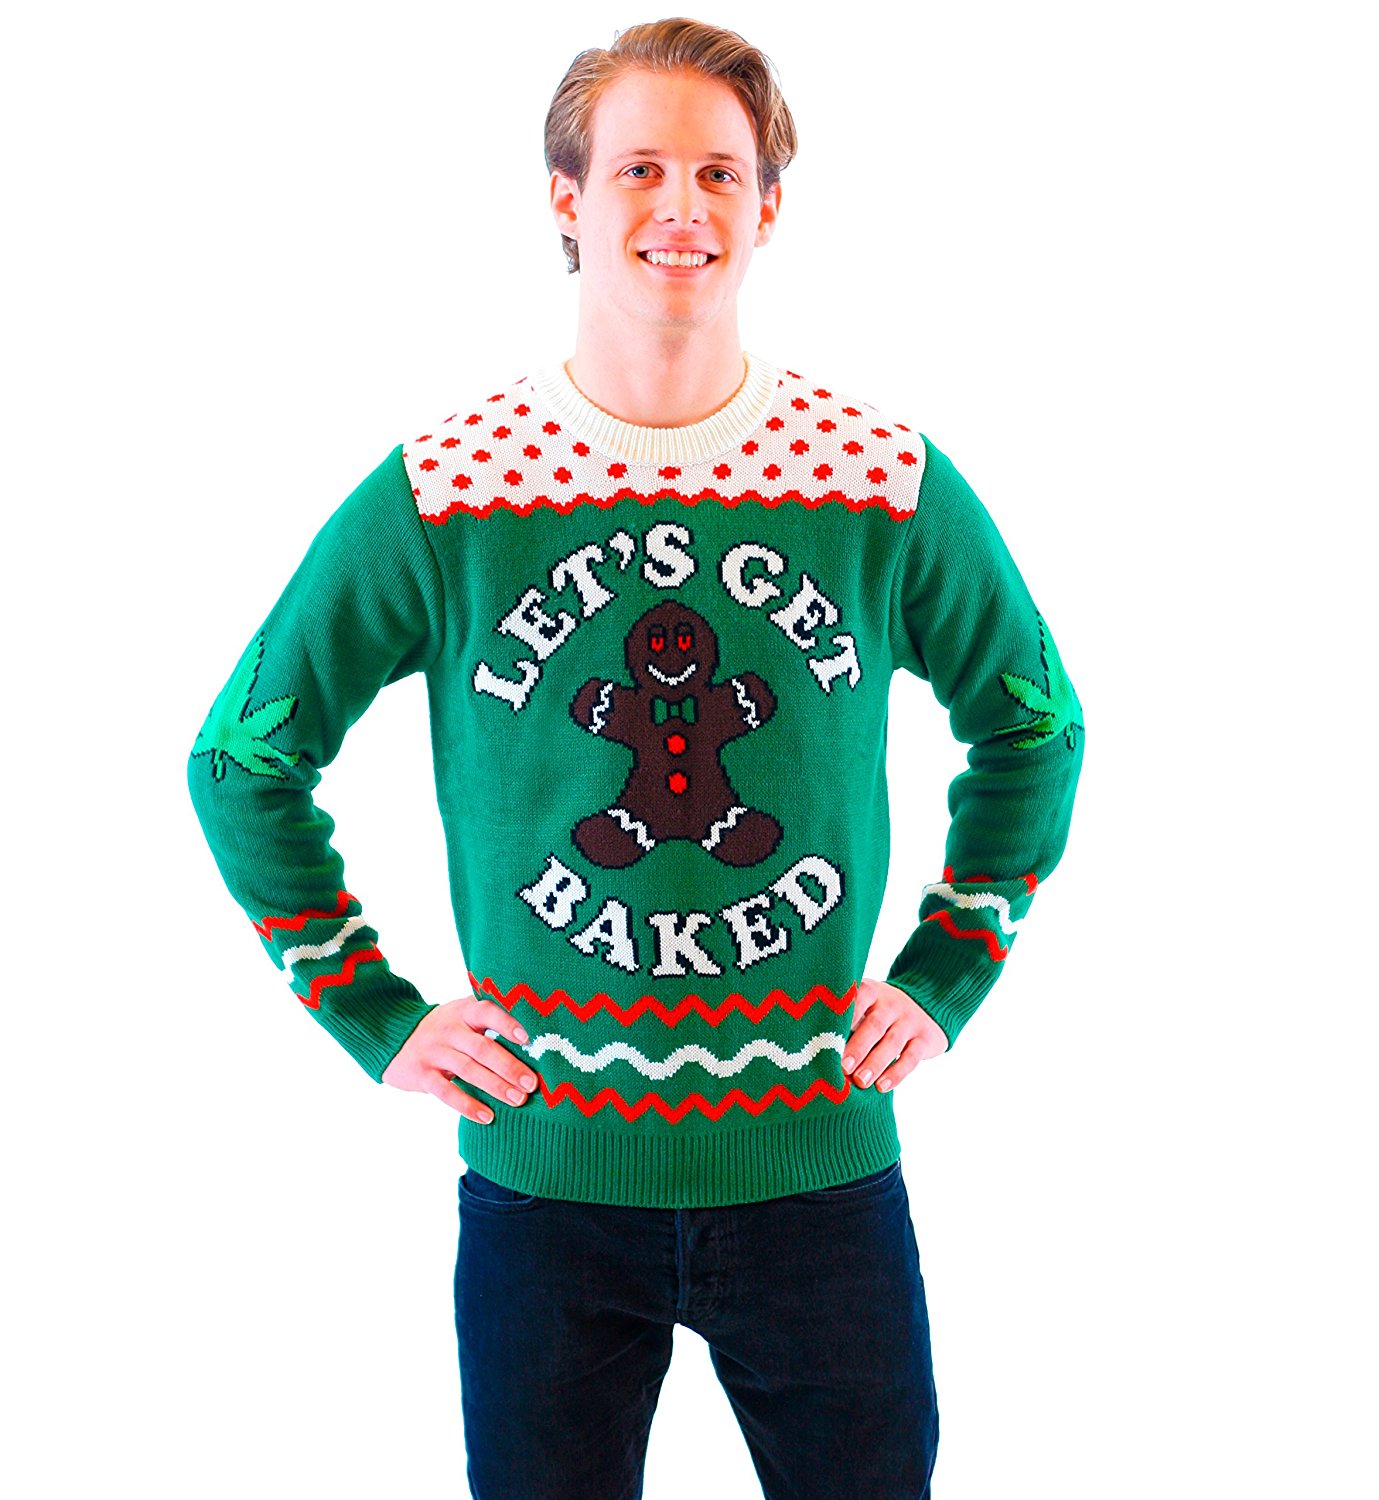 12 Awesome Christmas Sweaters! 84